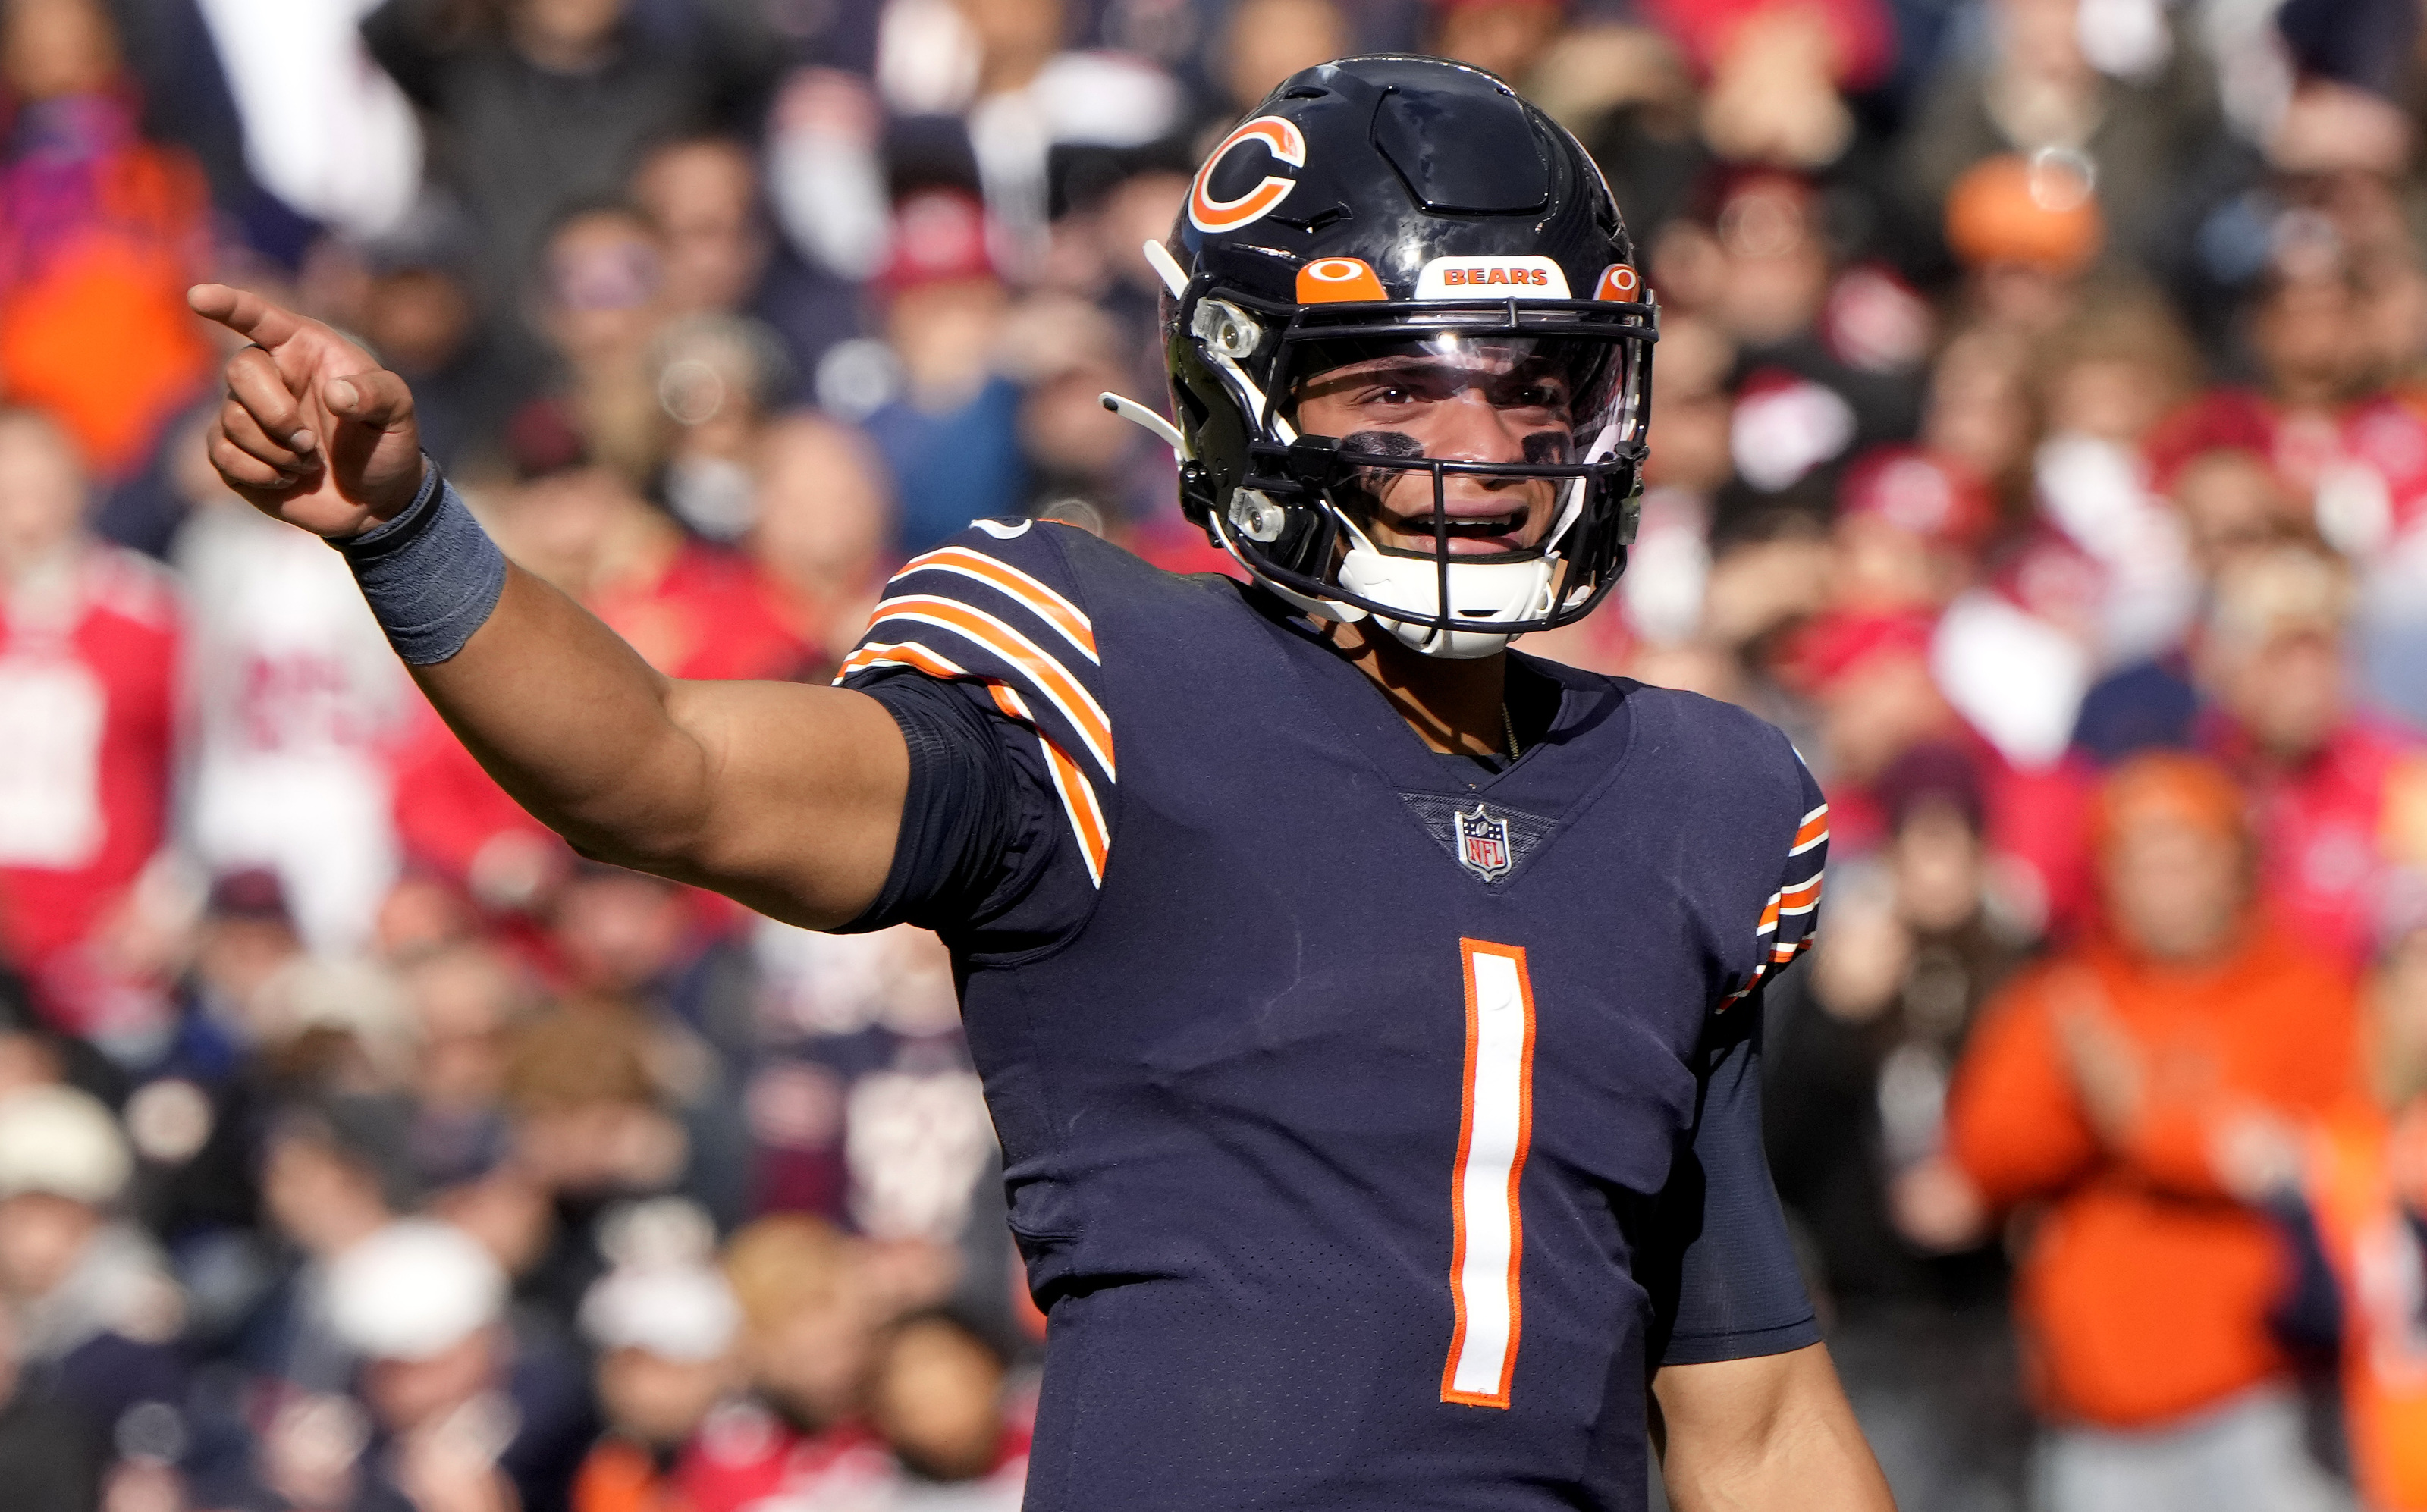 Chicago Bears: Justin Fields Plays Best Game So Far vs. 49ers